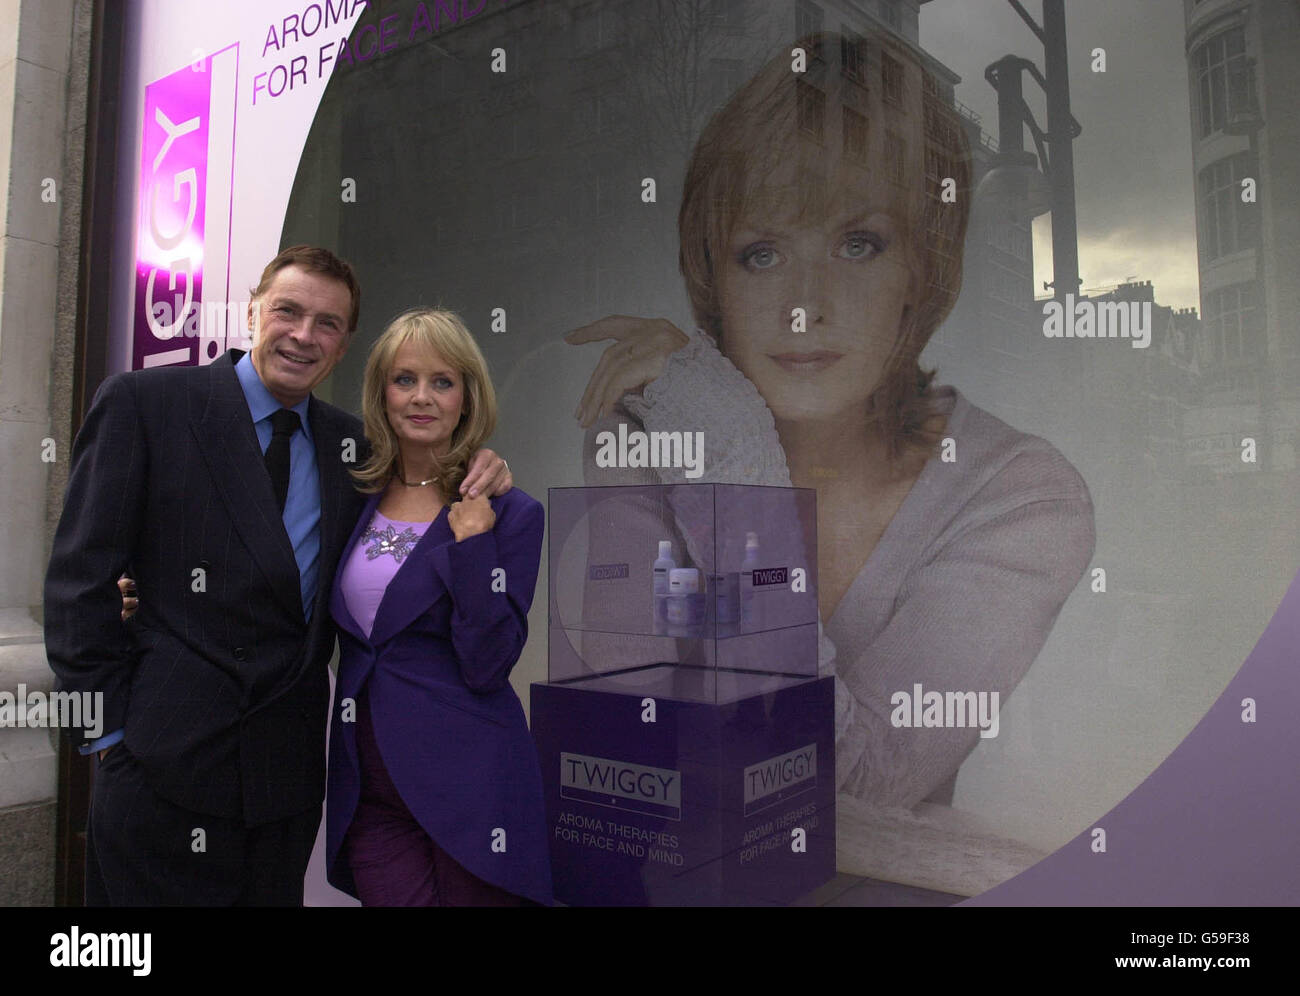 Sixties model Twiggy outside Selfridges department store with her husband, actor Leigh Lawson, in London, where her new skin care range (in display case, on right) is on sale. Stock Photo